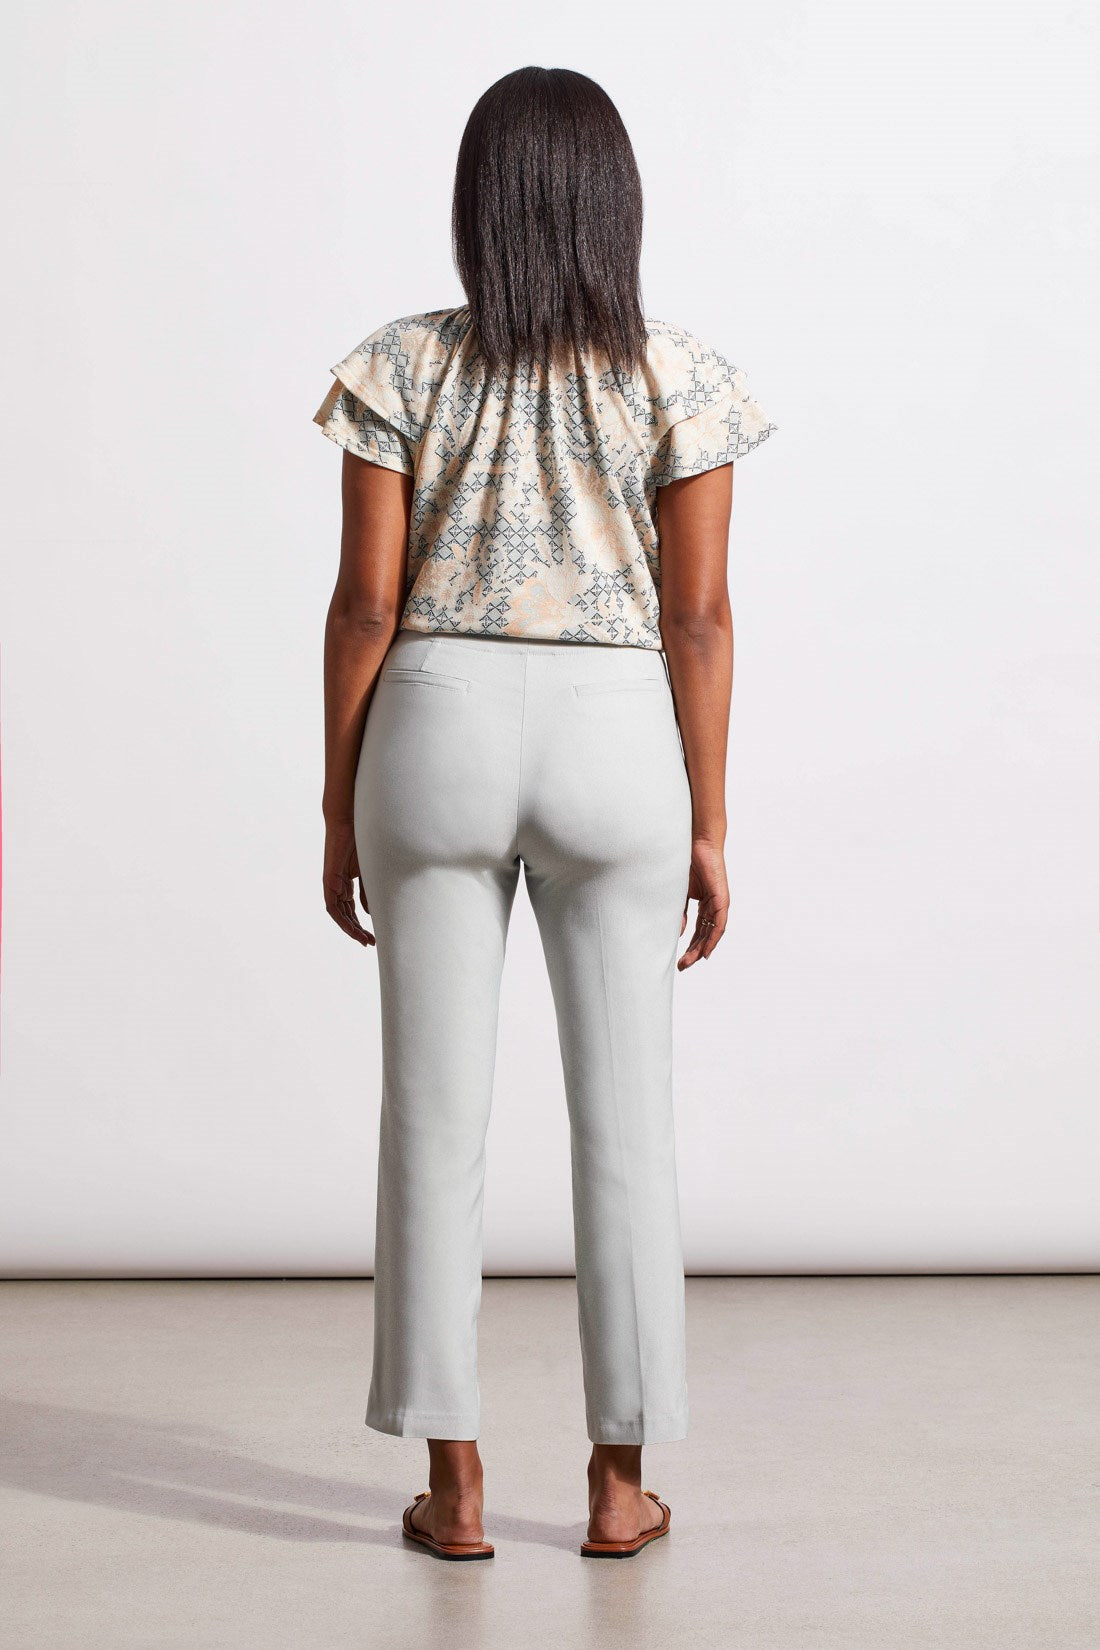 Petal Ankle Pants Flatten and Flatter Style Techno Leaves — L and L Stuff